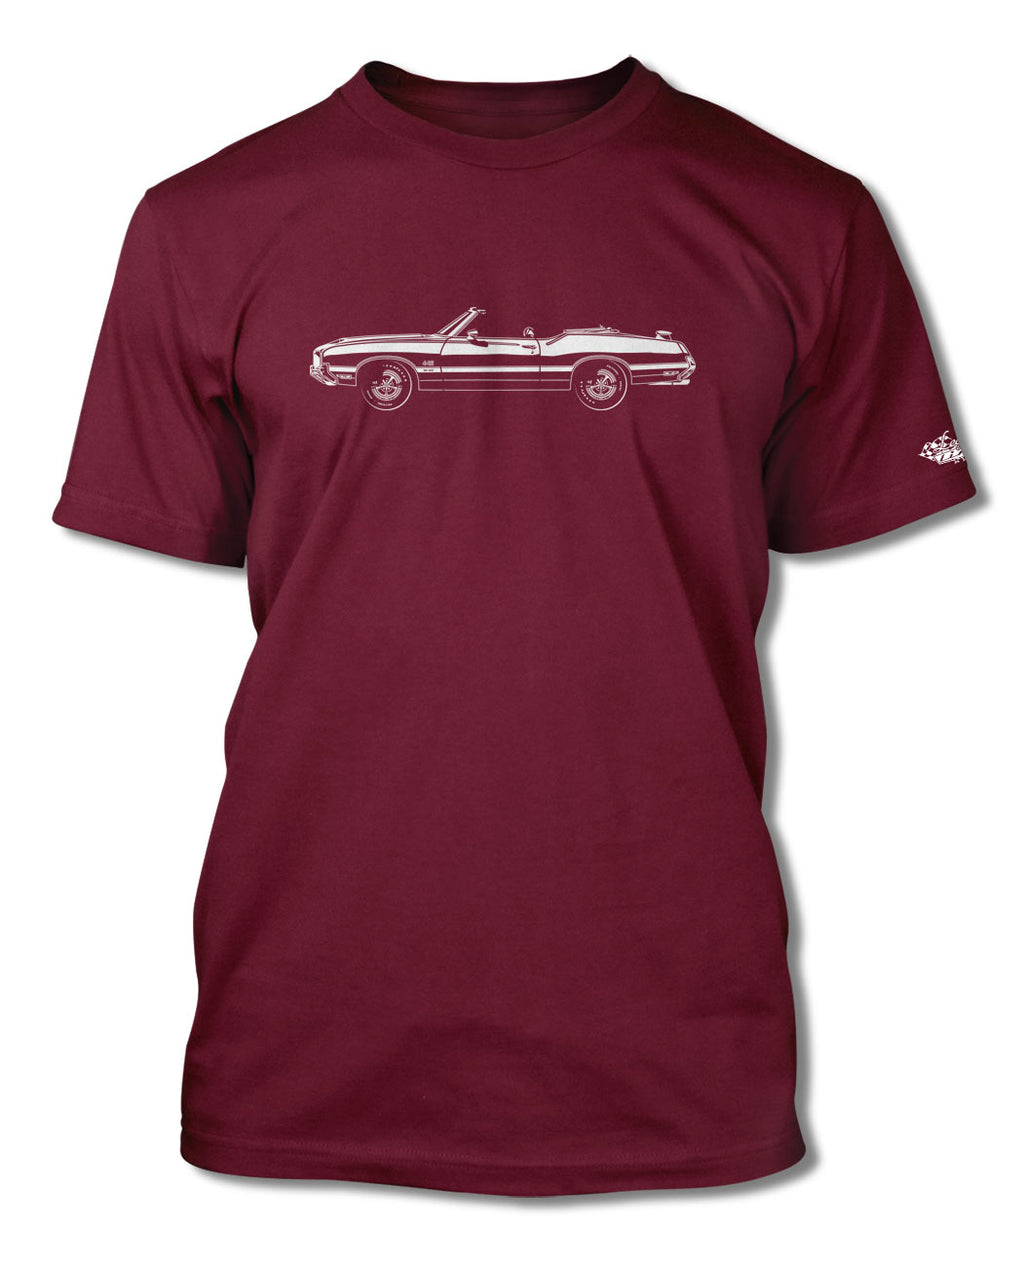 1971 Oldsmobile Cutlass 4-4-2 W-30 Convertible with Spoiler T-Shirt - Men - Side View